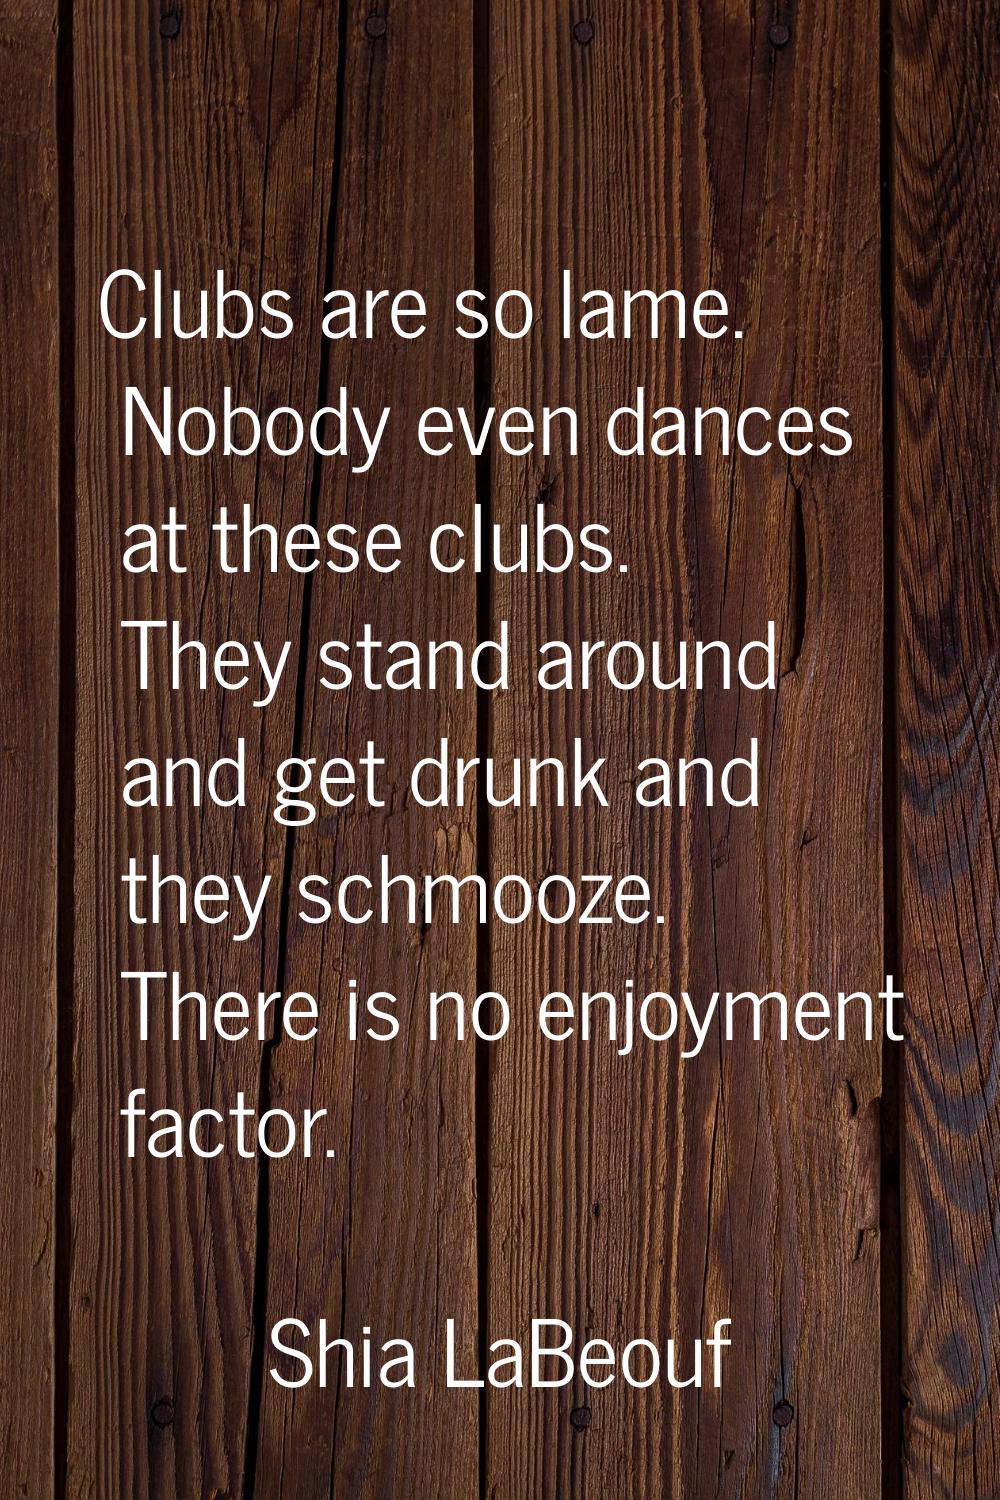 Clubs are so lame. Nobody even dances at these clubs. They stand around and get drunk and they schm